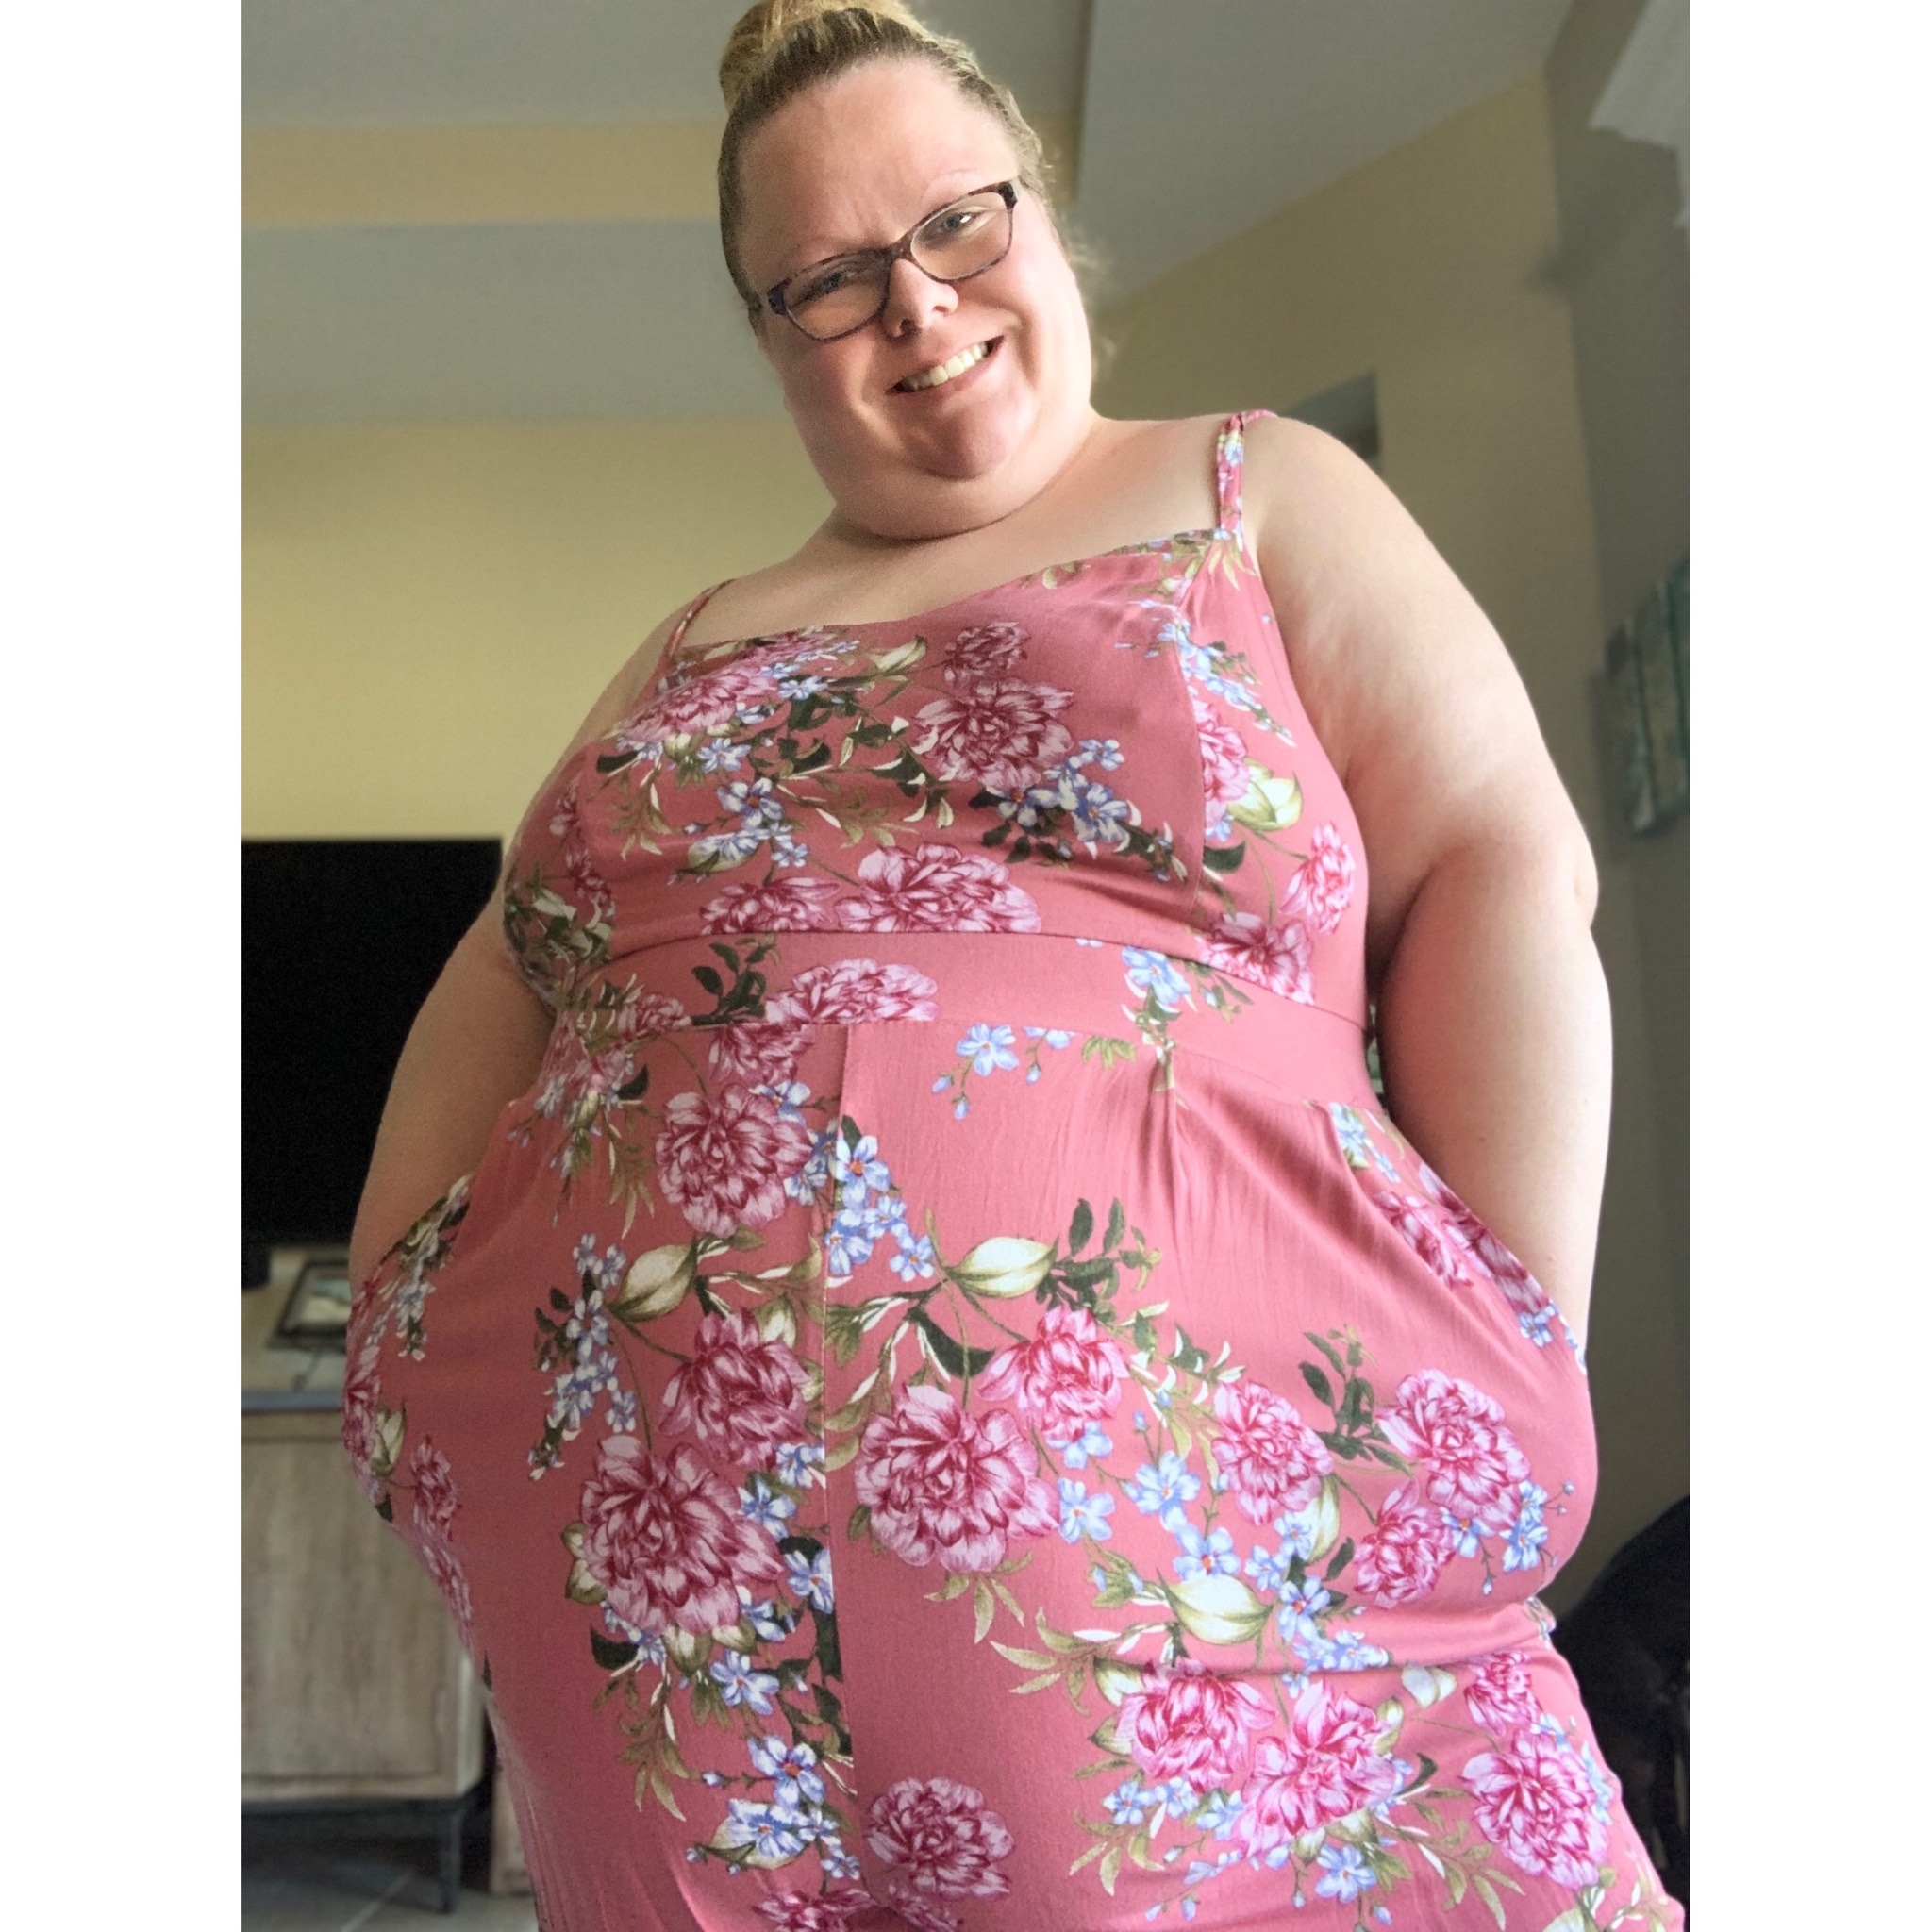 Sex fattonibabe:feelin’ cute in my romper today pictures